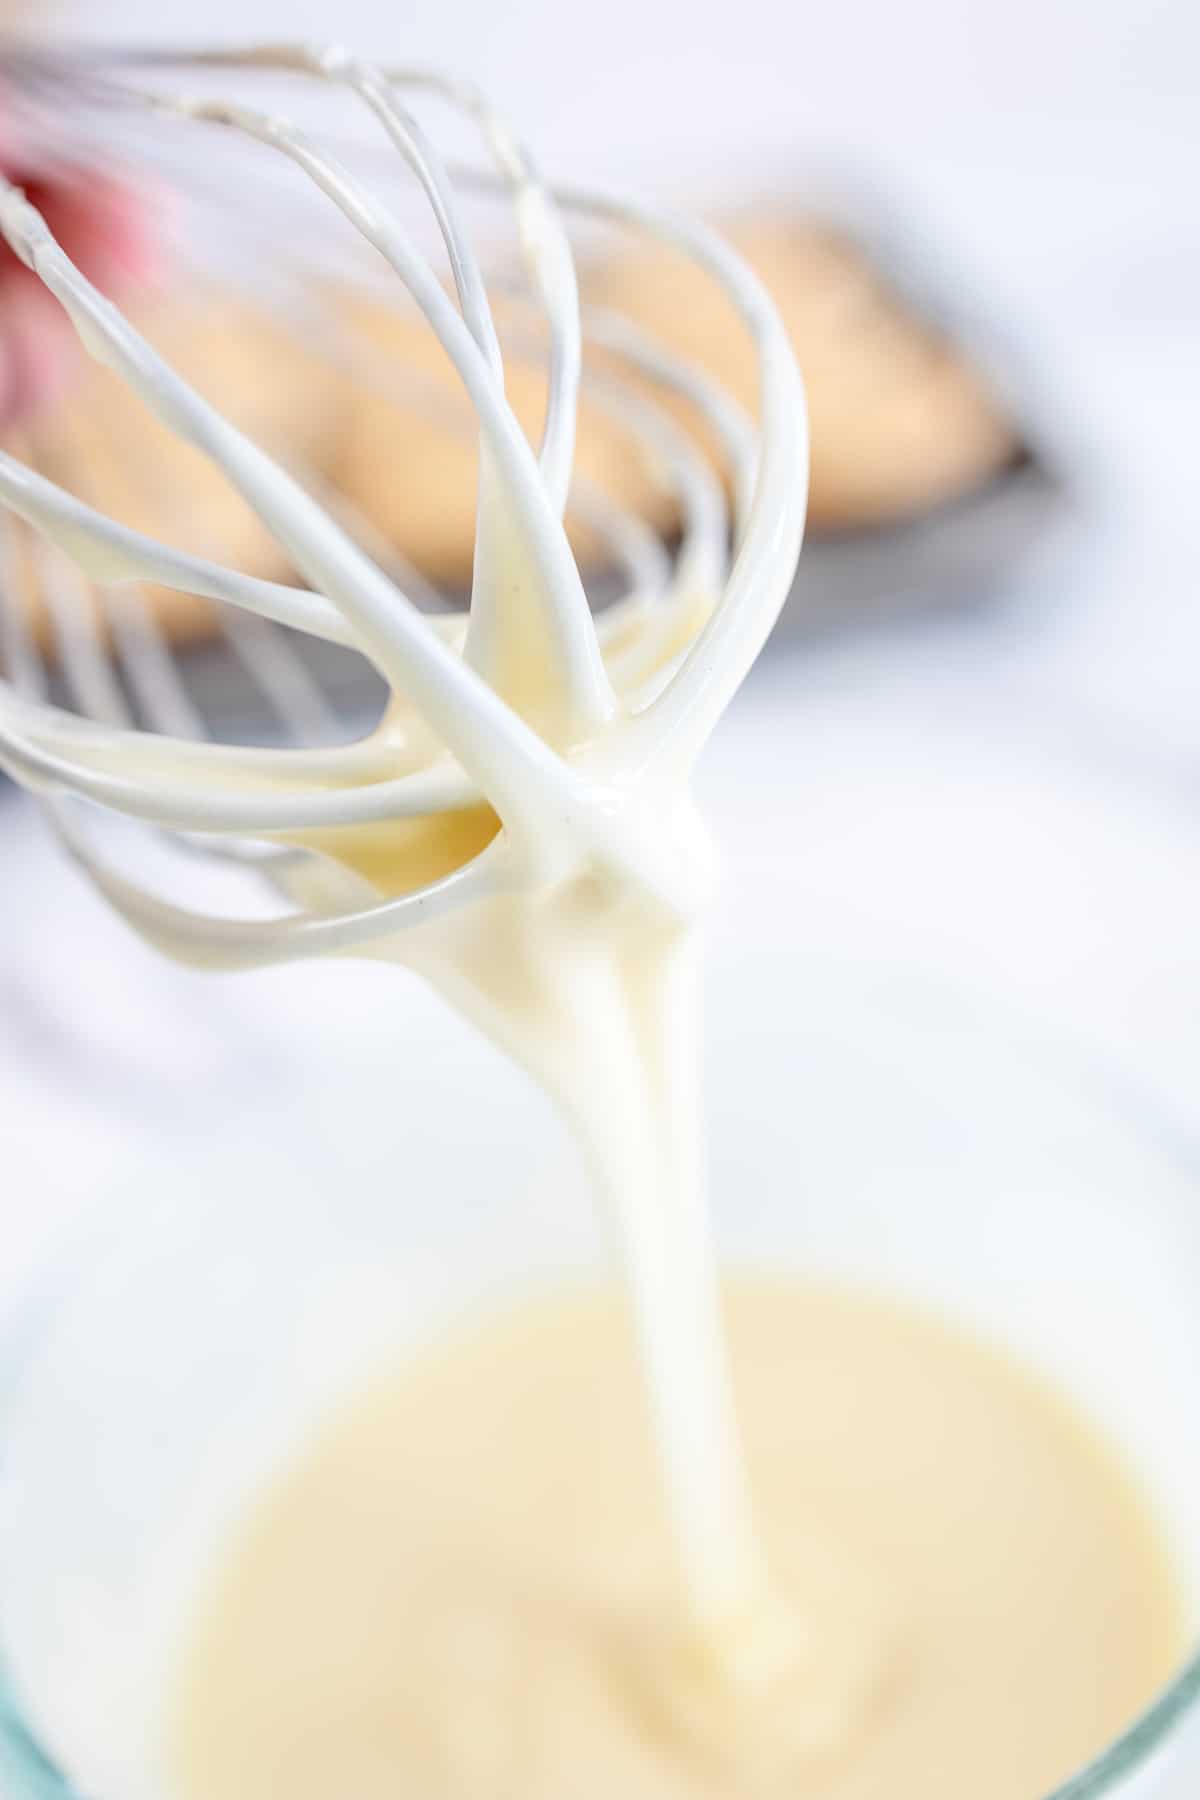 Close up of a whisk coated in white glaze that is dripping off into a glass bowl below.